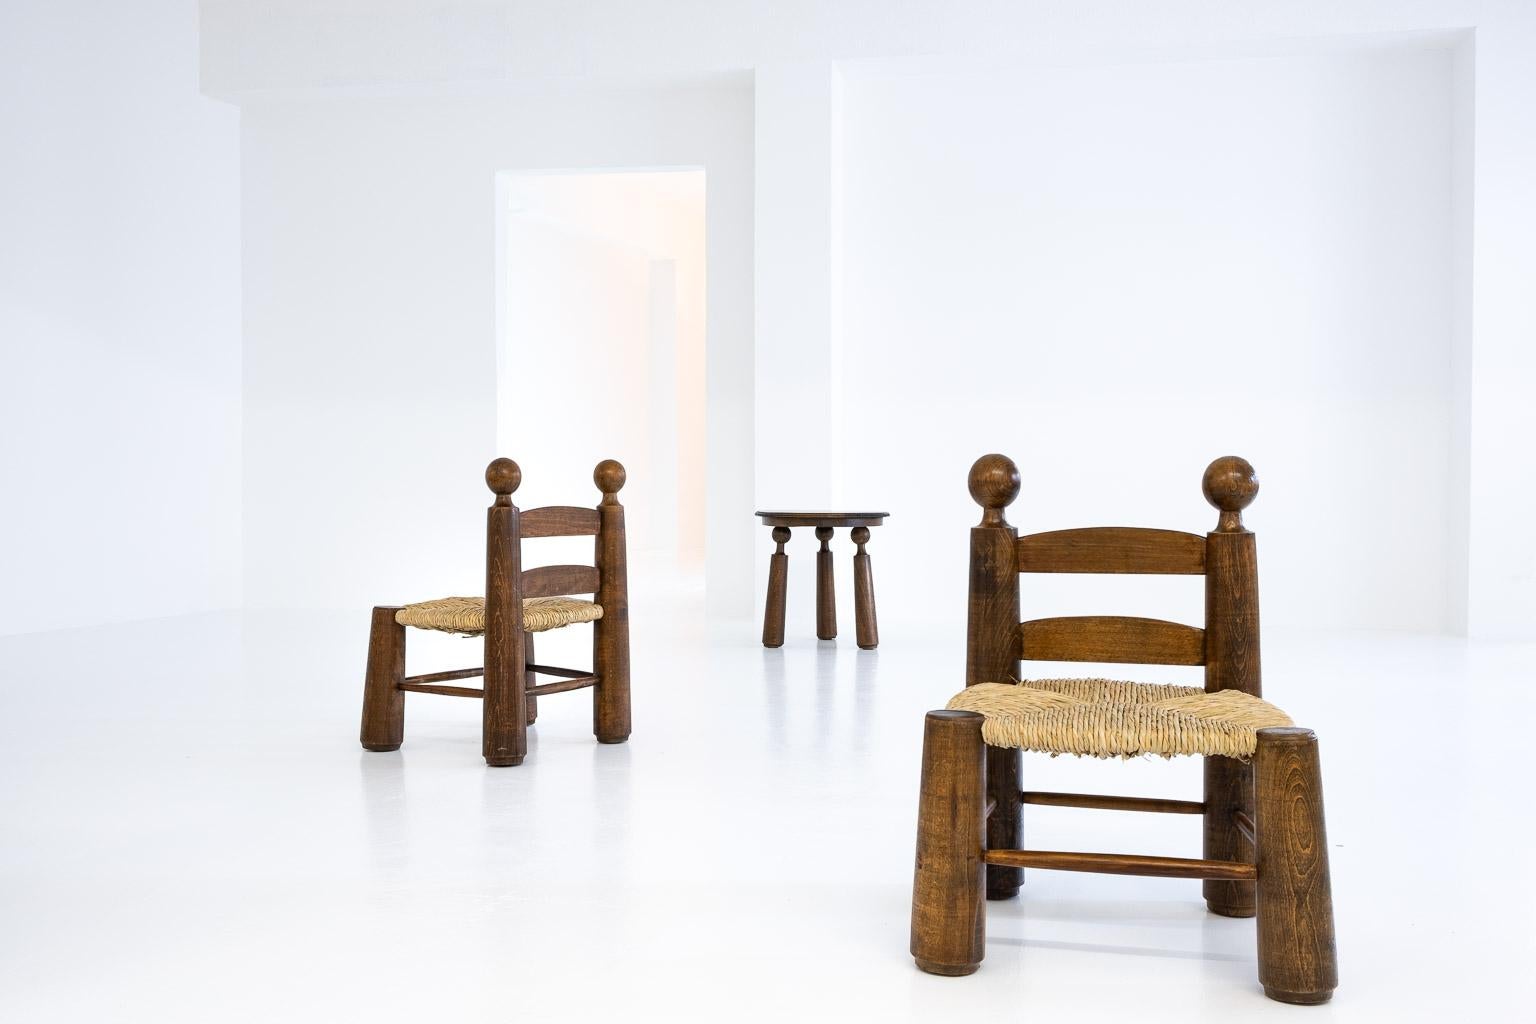 Modern Rustic, Brutalistic Table / Chair Set by Charles Dudouyt, France, 1940s For Sale 2